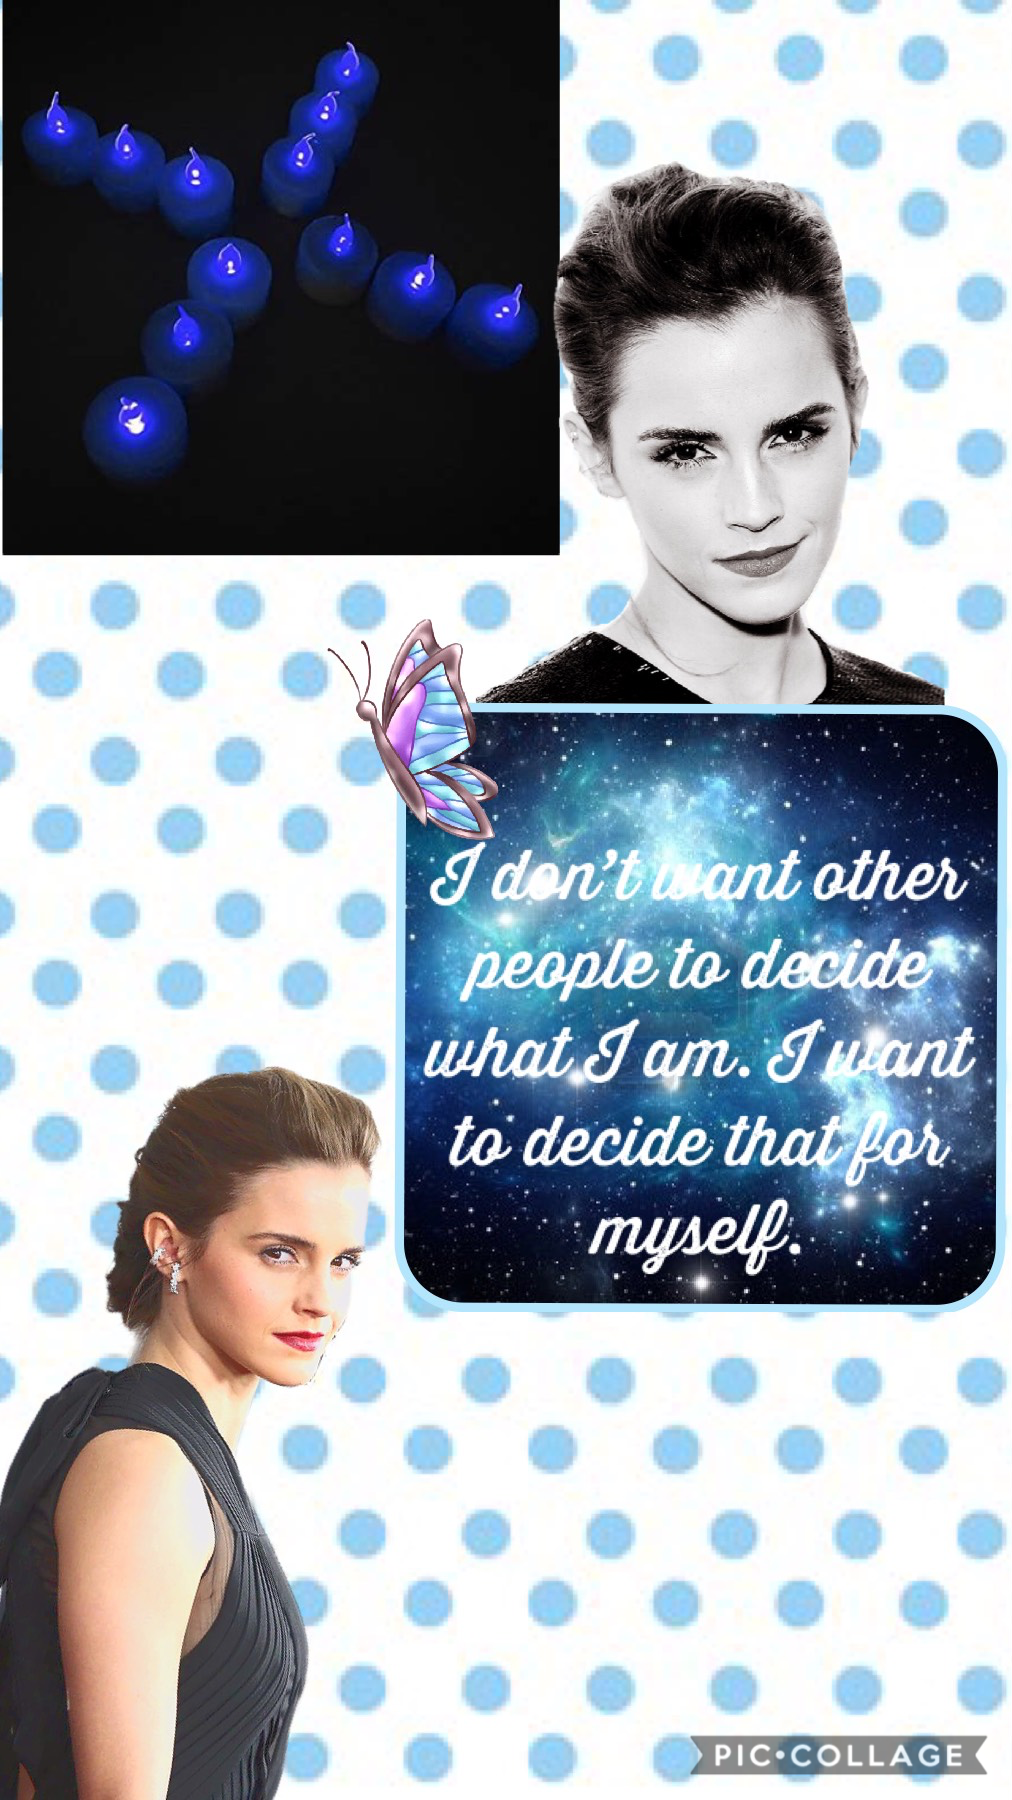 Tap on the blue heart 💙
Emma Watson 
Comment your favourite actor/actress